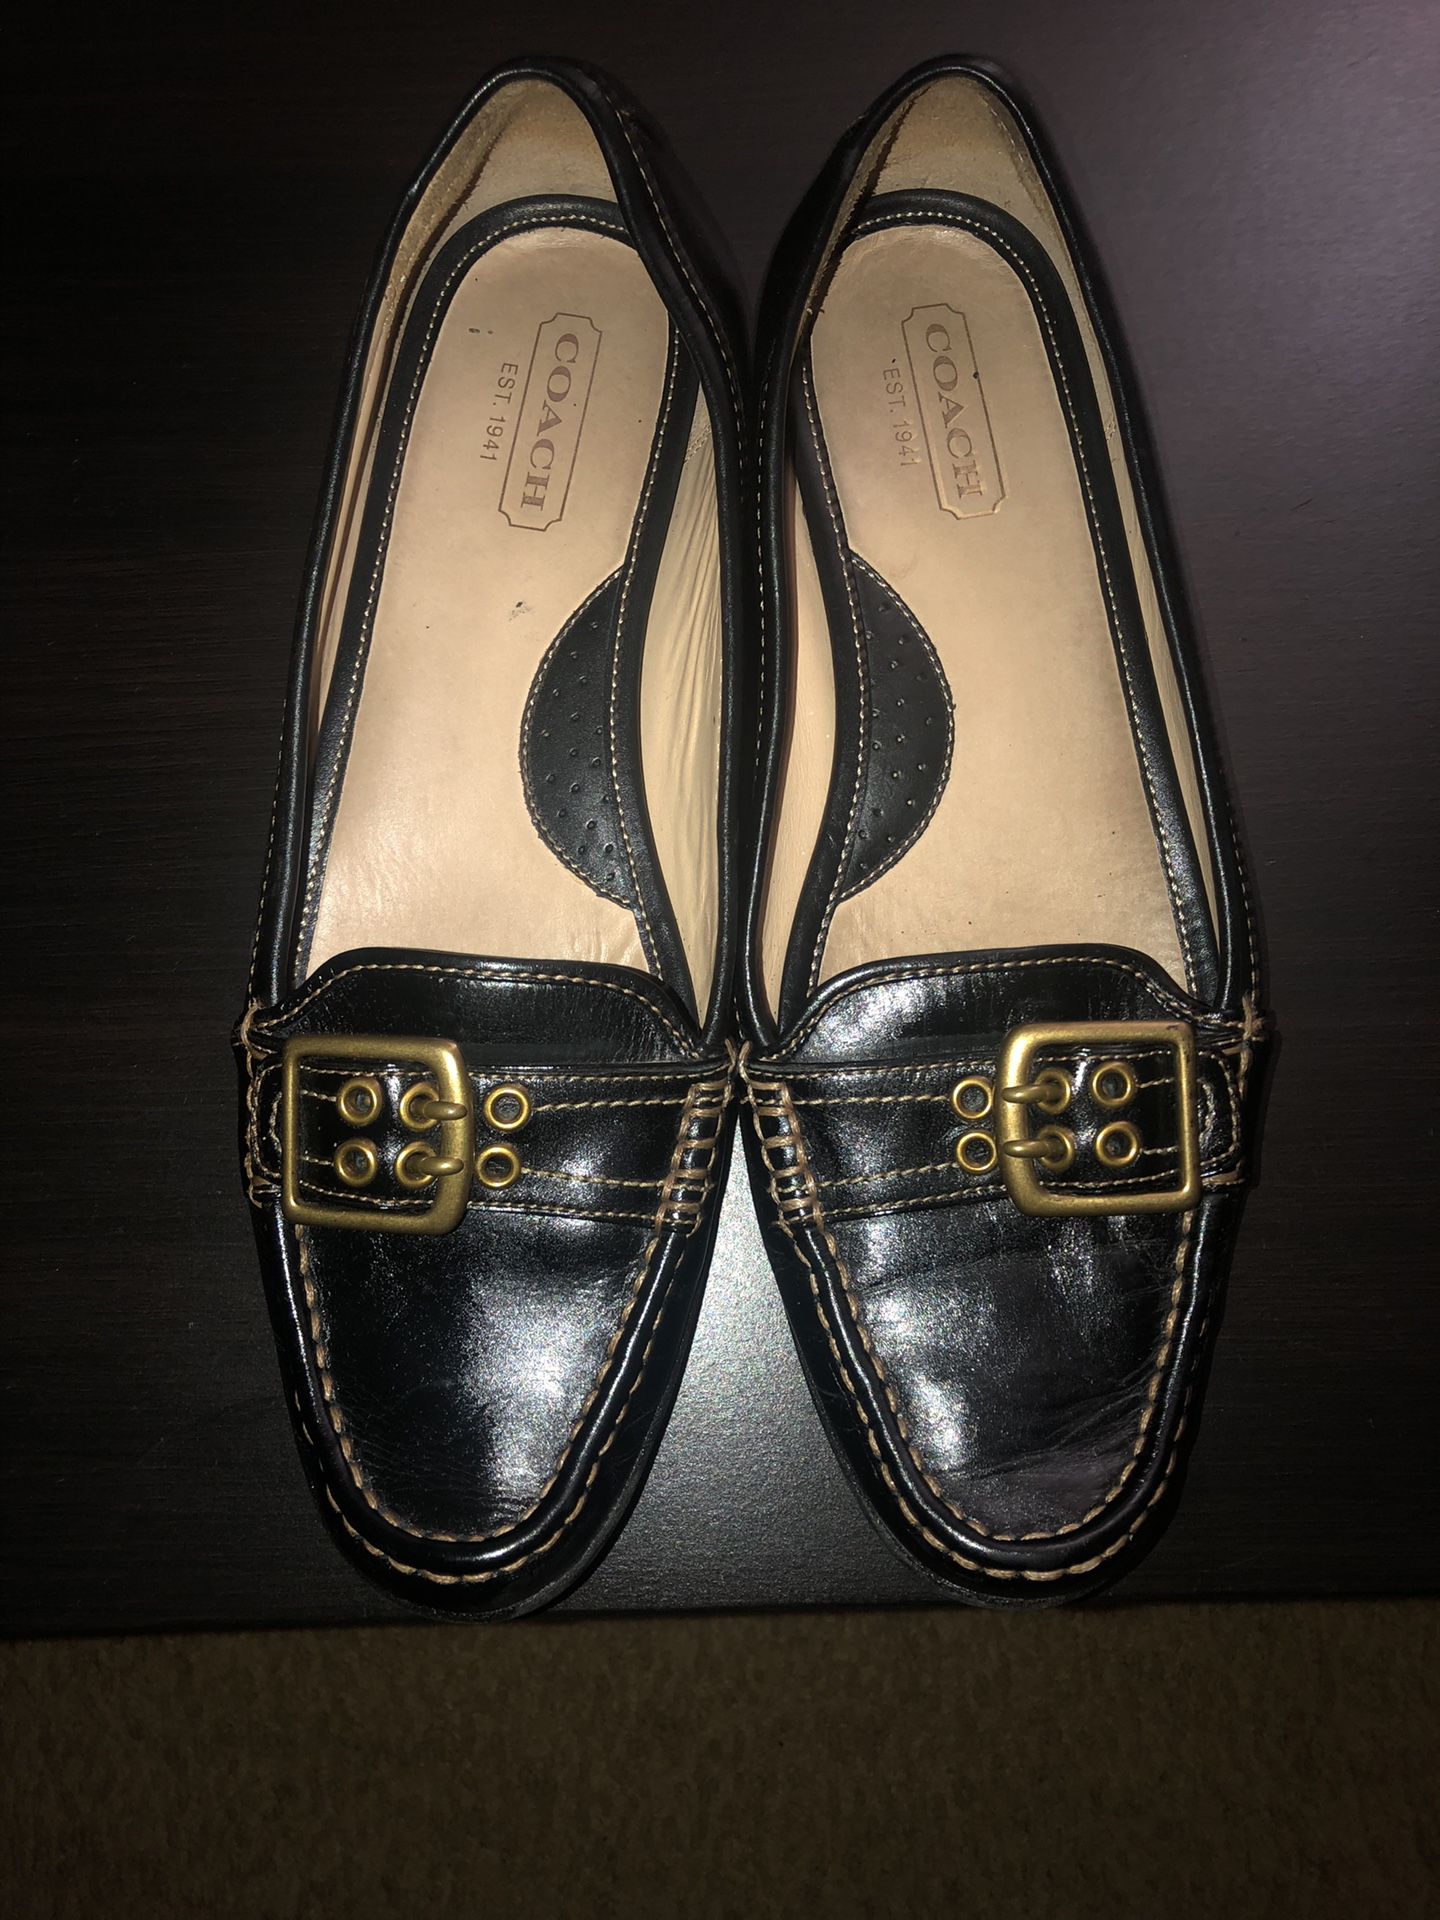 Vintage Coach loafers